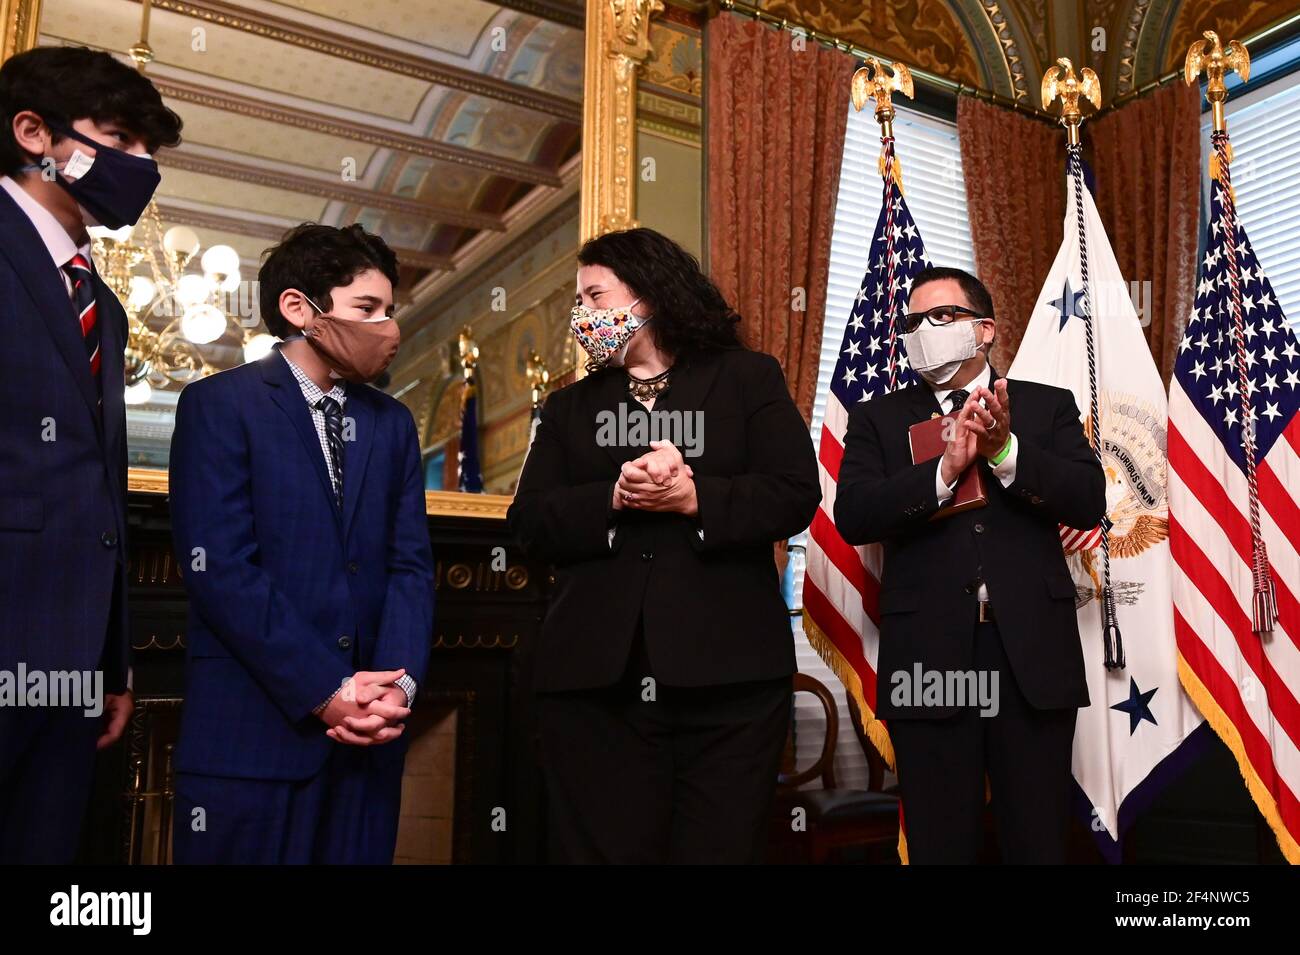 Isabel Guzman, administrator of the U.S. Small Business Administration (SBA), reacts with her husband, Javier Guzman, and sons, Cortez Guzman and Cruz Guzman after being sworn in by U.S. Vice President Kamala Harris during a ceremony in the Eisenhower Executive Office Building in Washington, DC, U.S., on Monday, March 22, 2021. Guzman served as a deputy chief of staff and senior adviser to the administrator at the SBA during the Obama administration, and has run her own small businesses. Credit: Erin Scott/Pool via CNP /MediaPunch Stock Photo